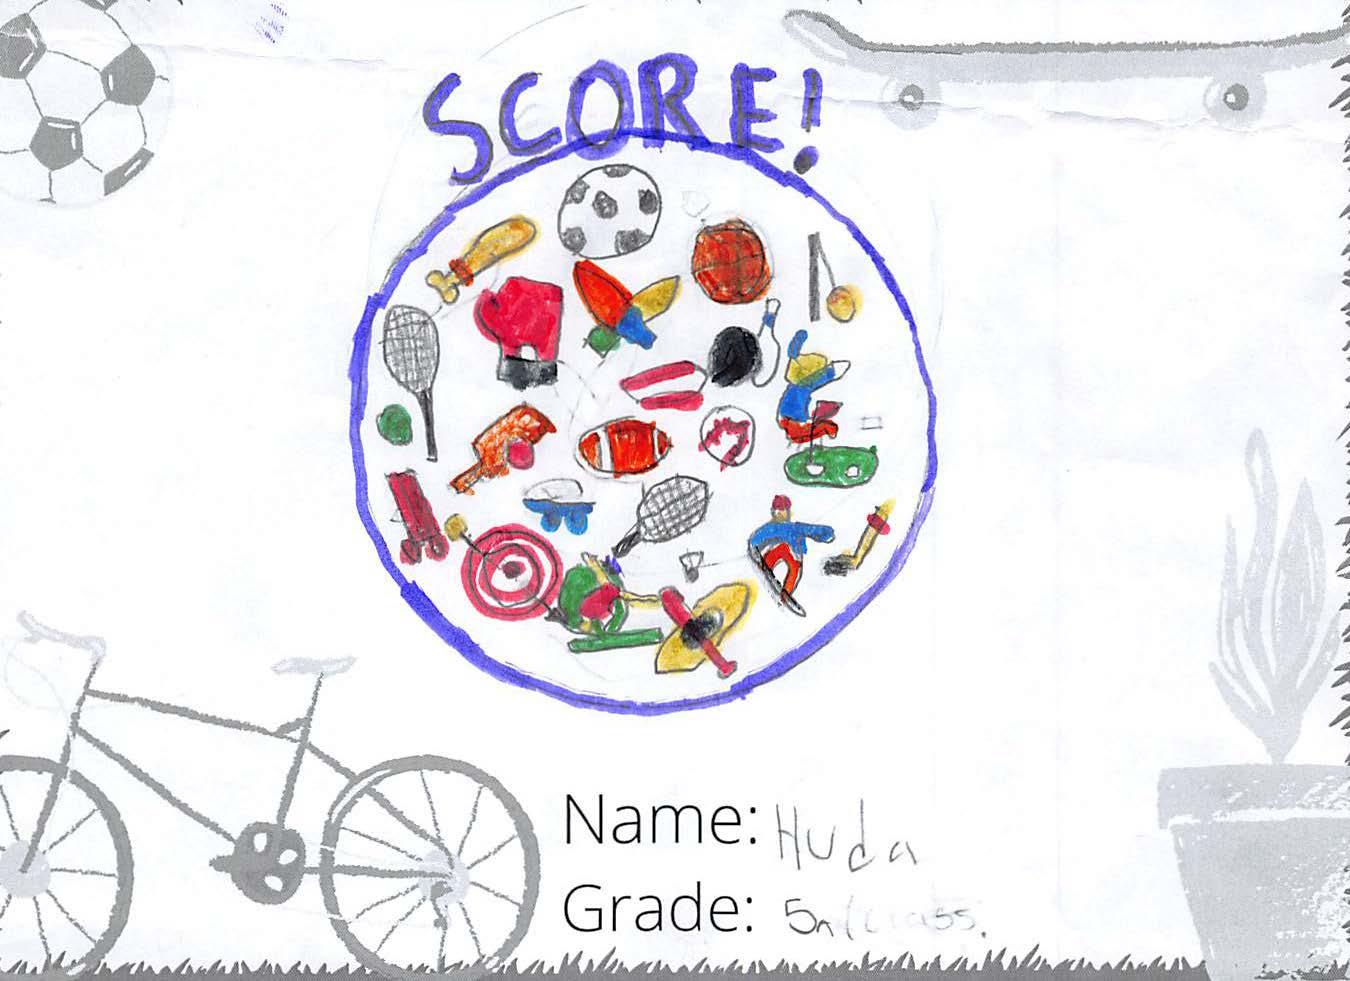 Marker drawing for the SCORE! logo contest. The drawing is colourful and includes many sports and activities.